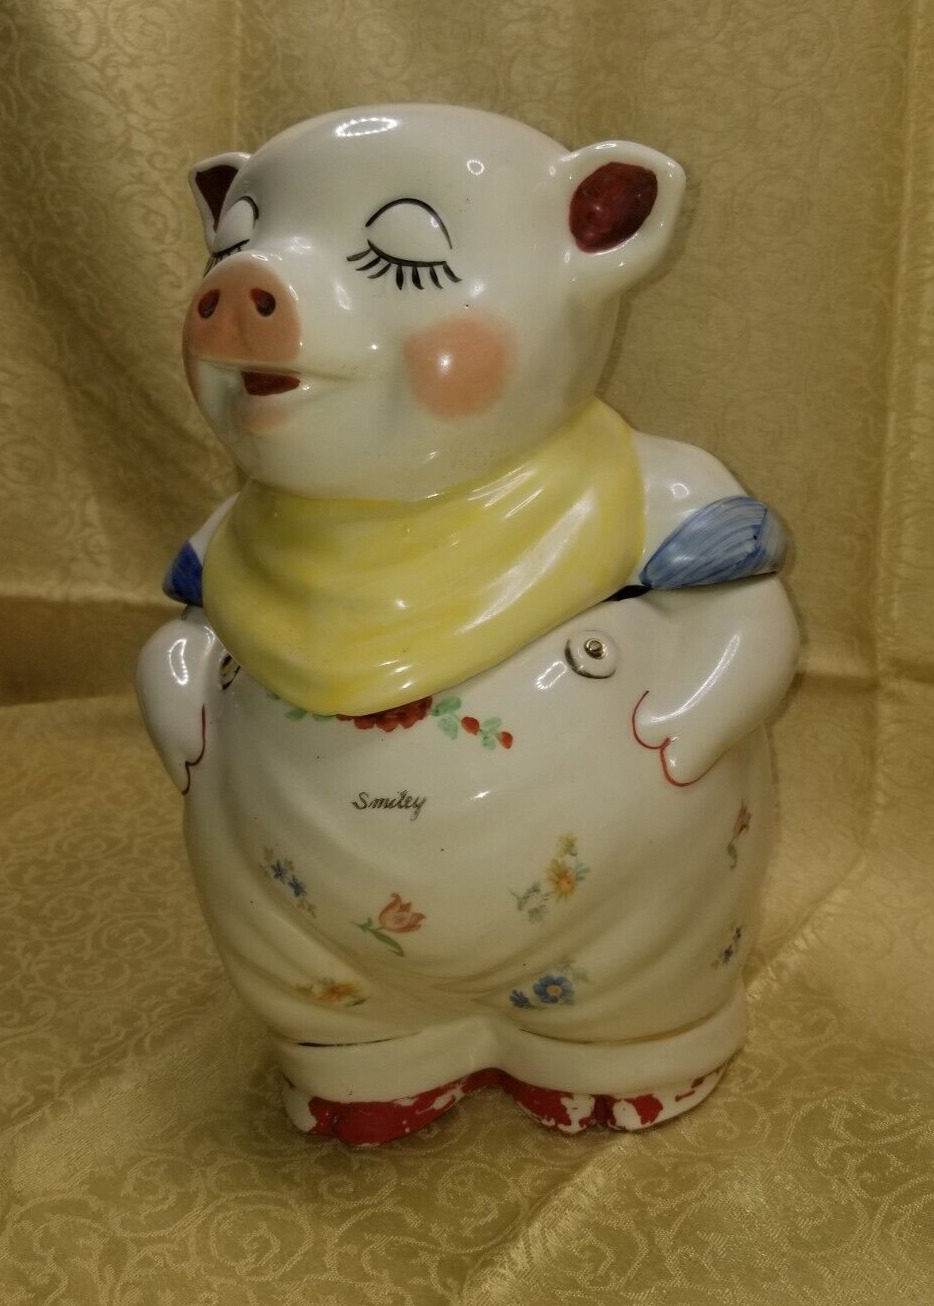 SMILEY PIG COOKIE JAR YELLOW SCARF SHAWNEE POTTERY Vintage 1940's made in USA